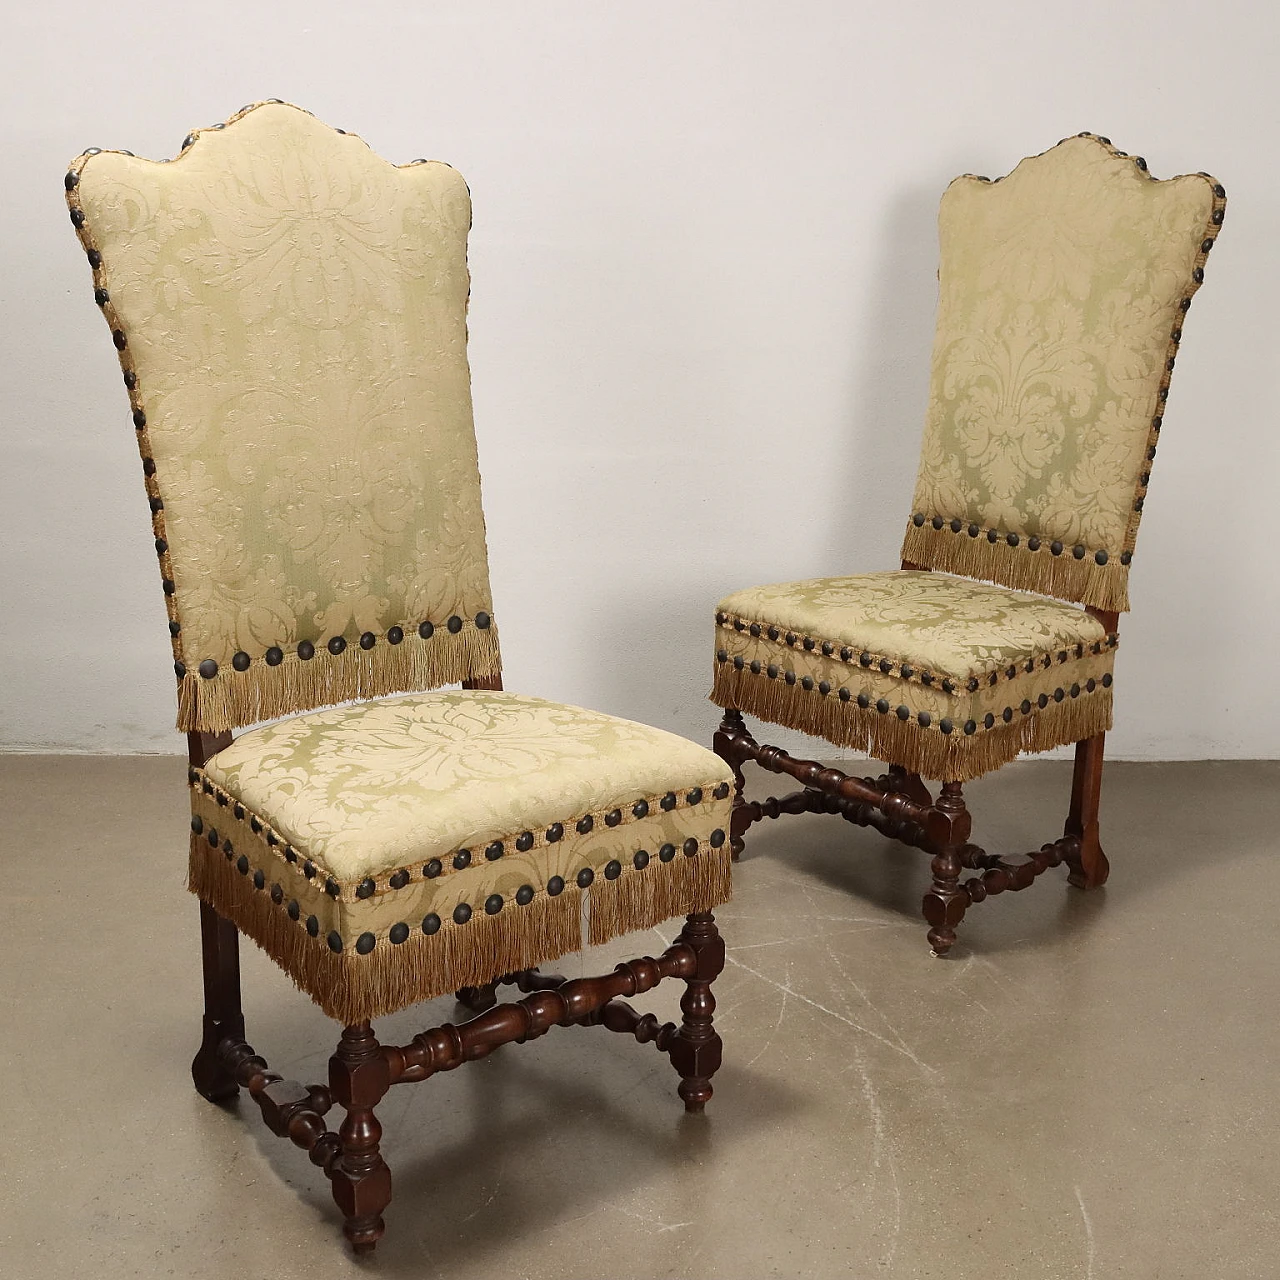 4 Wooden chairs with bobbin legs and brocade fabric, 19th century 3